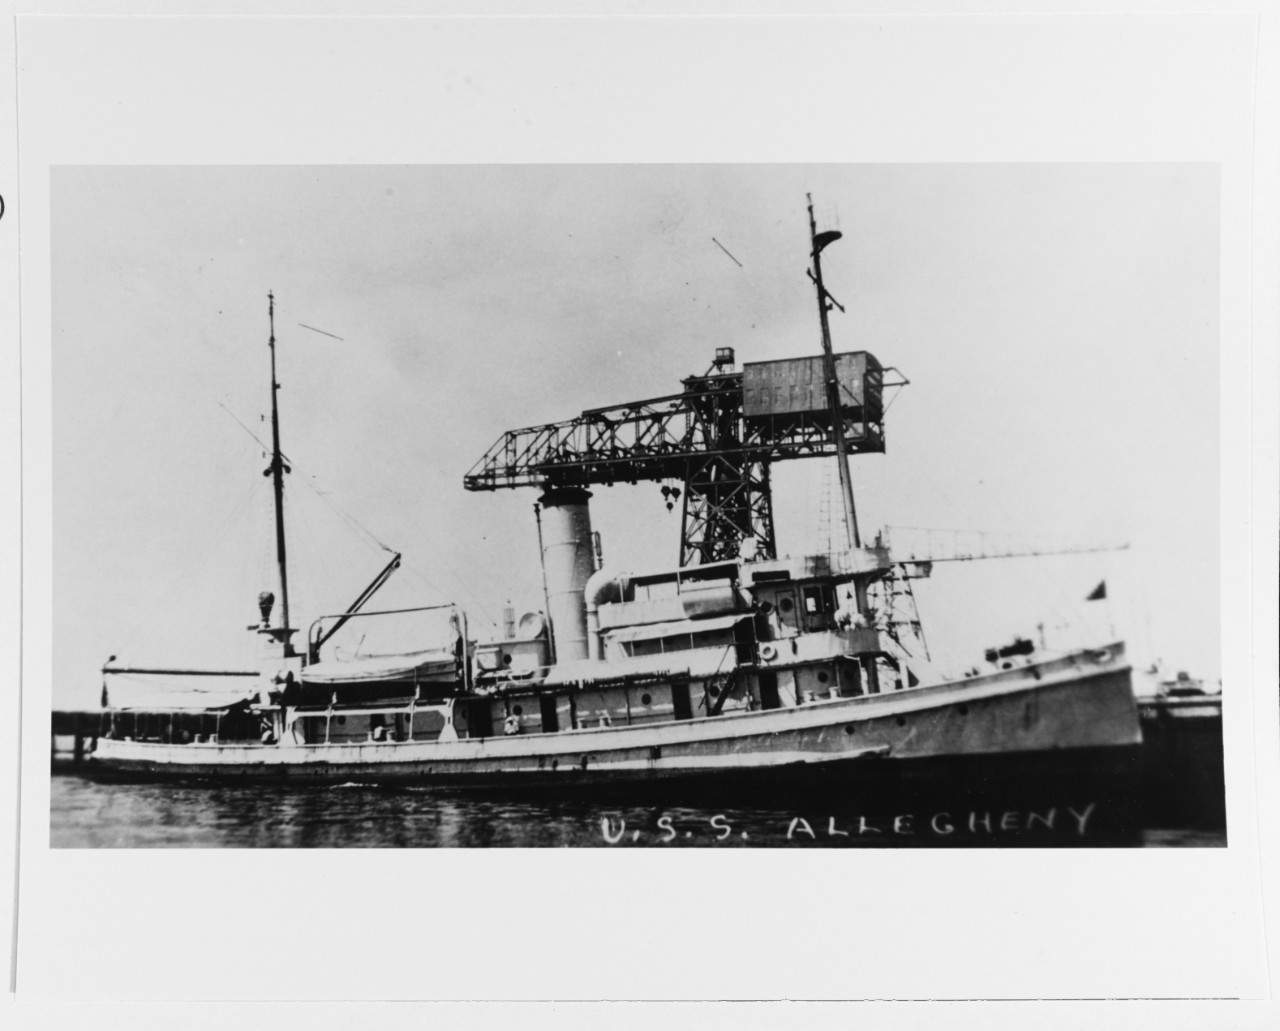 USS ALLEGHENY (AT-19)